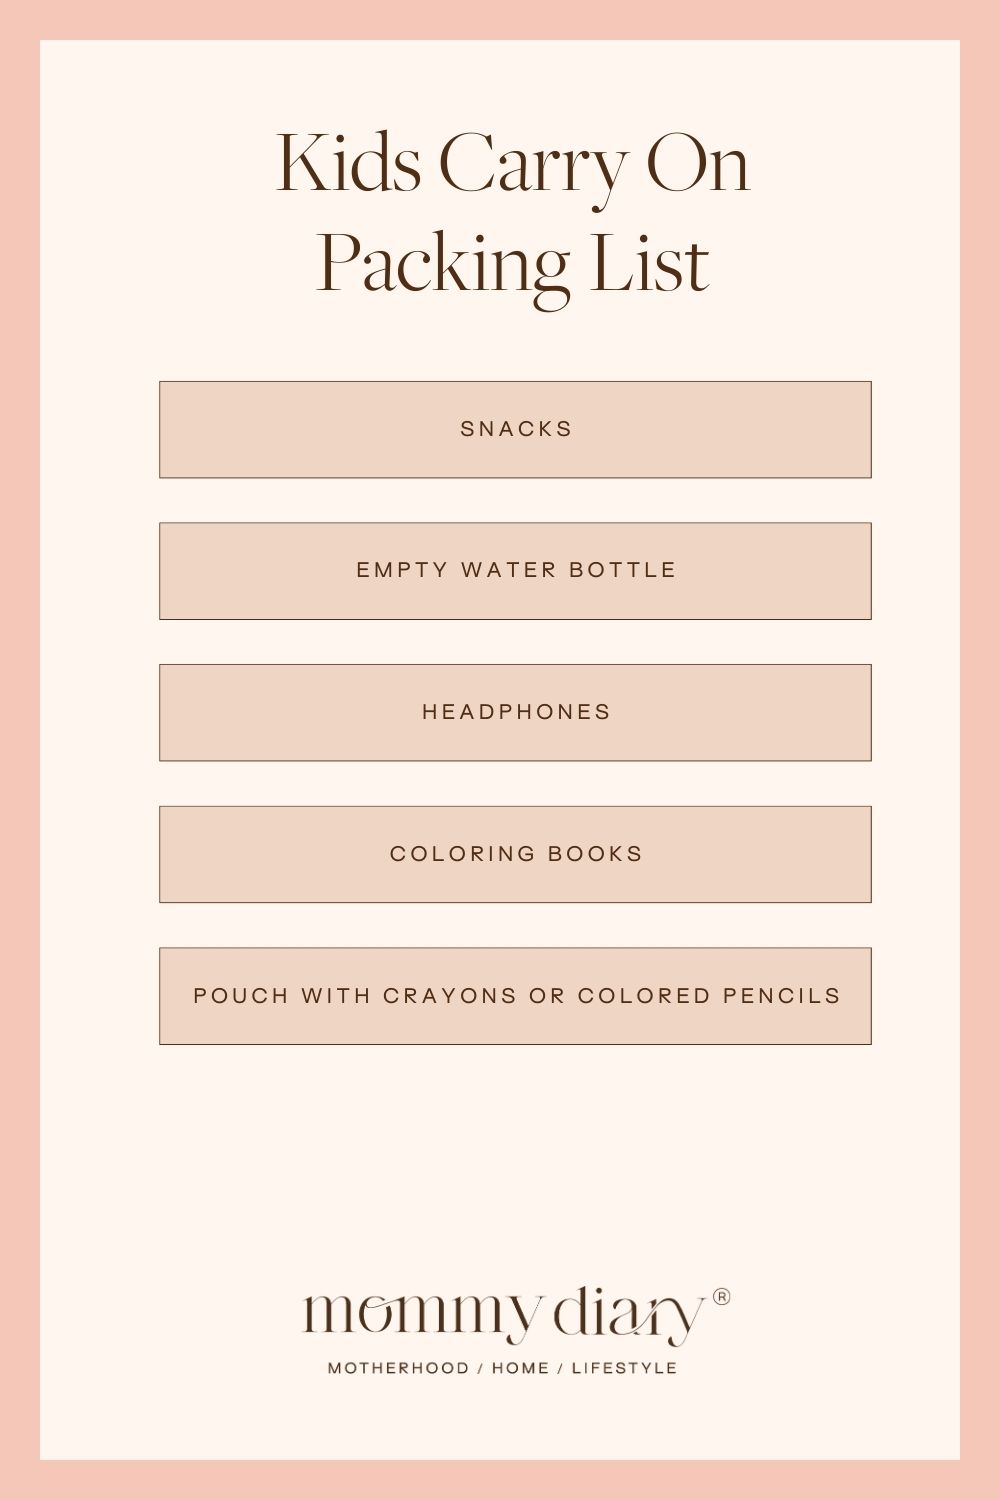 Kids Carry On Packing List ideas